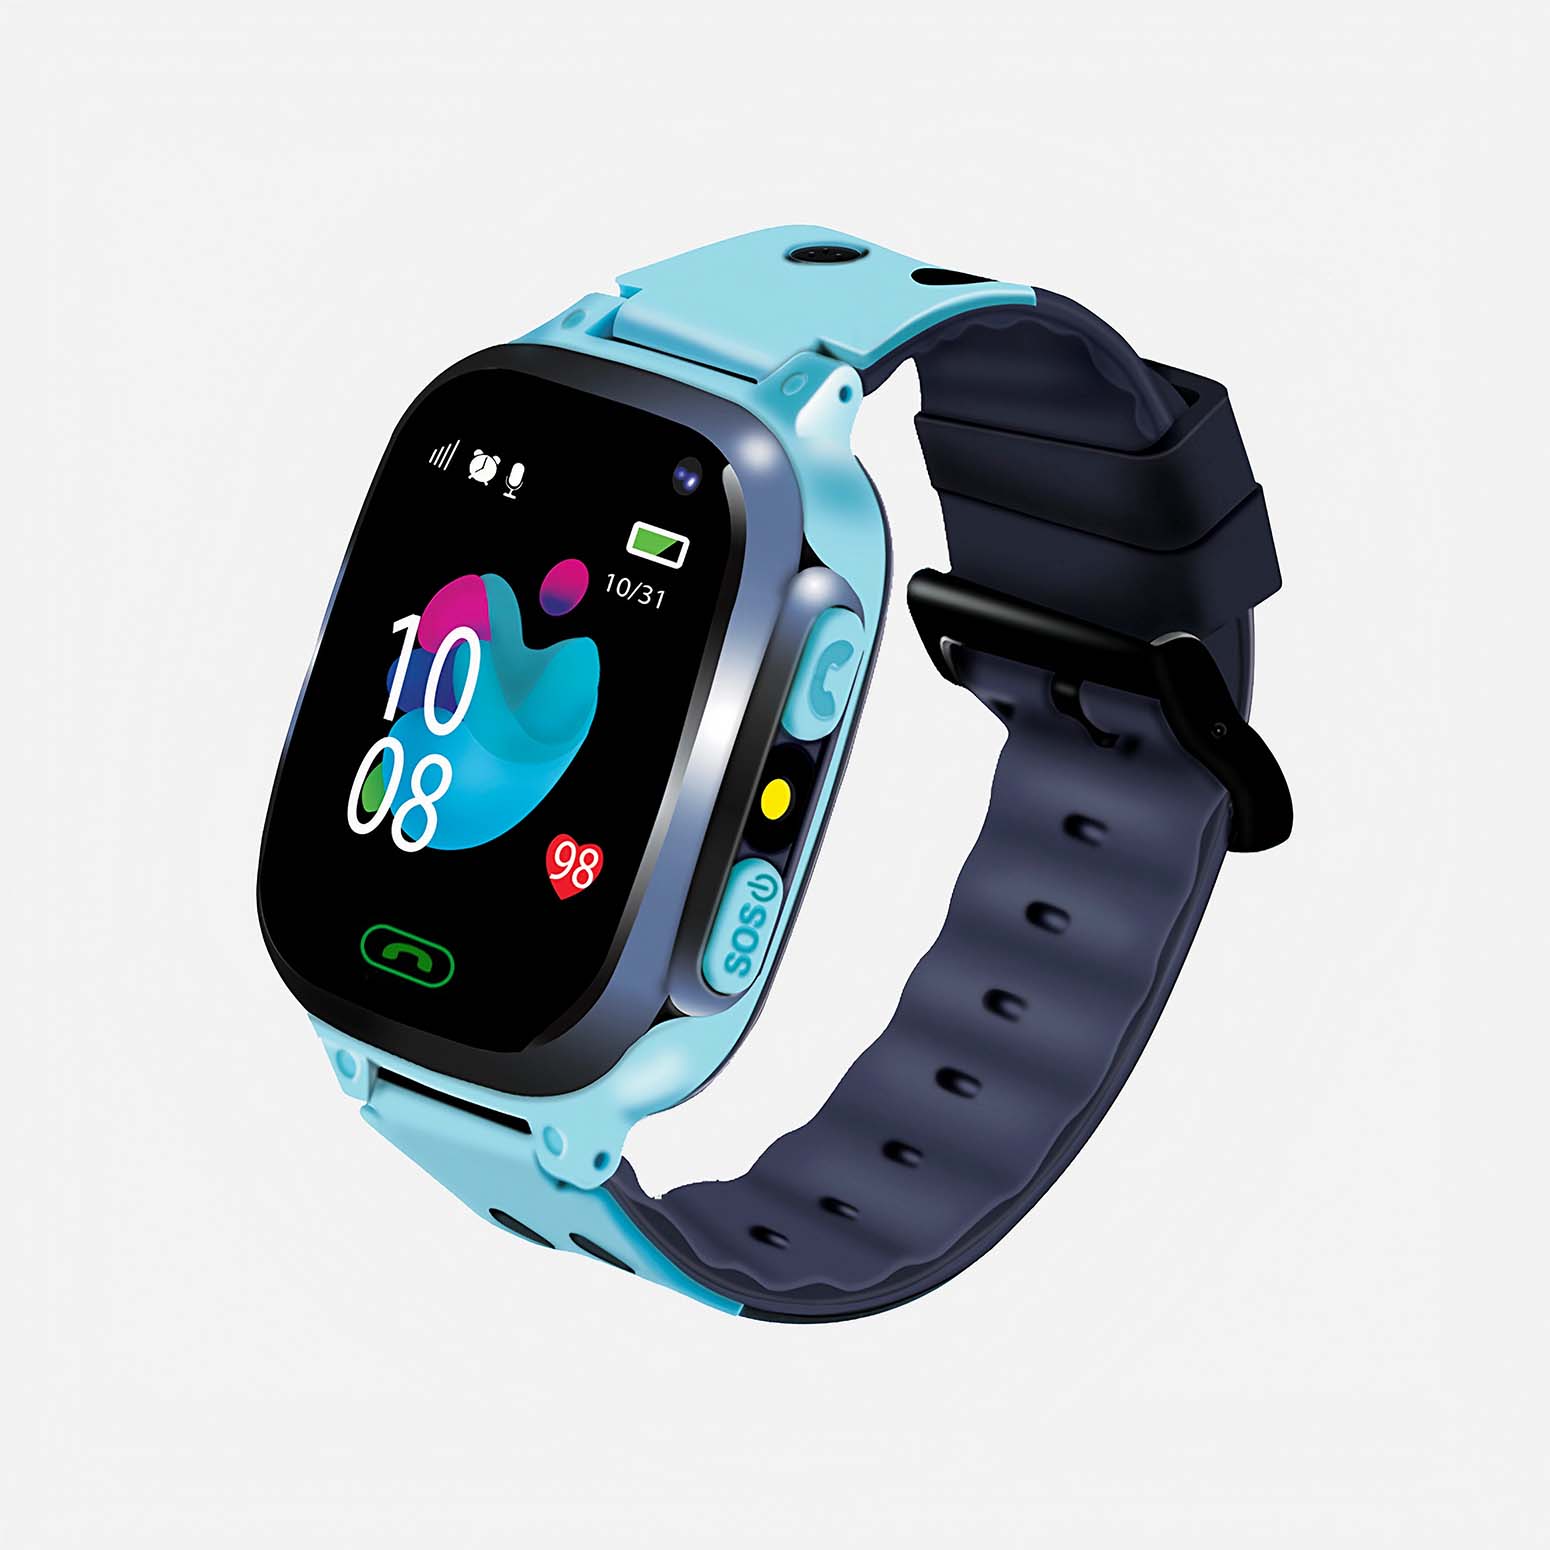 sekyo-secura-s1-smartwatch-for-kids-location-tracking-voice-calling-geo-fence-easy-to-use-36mm